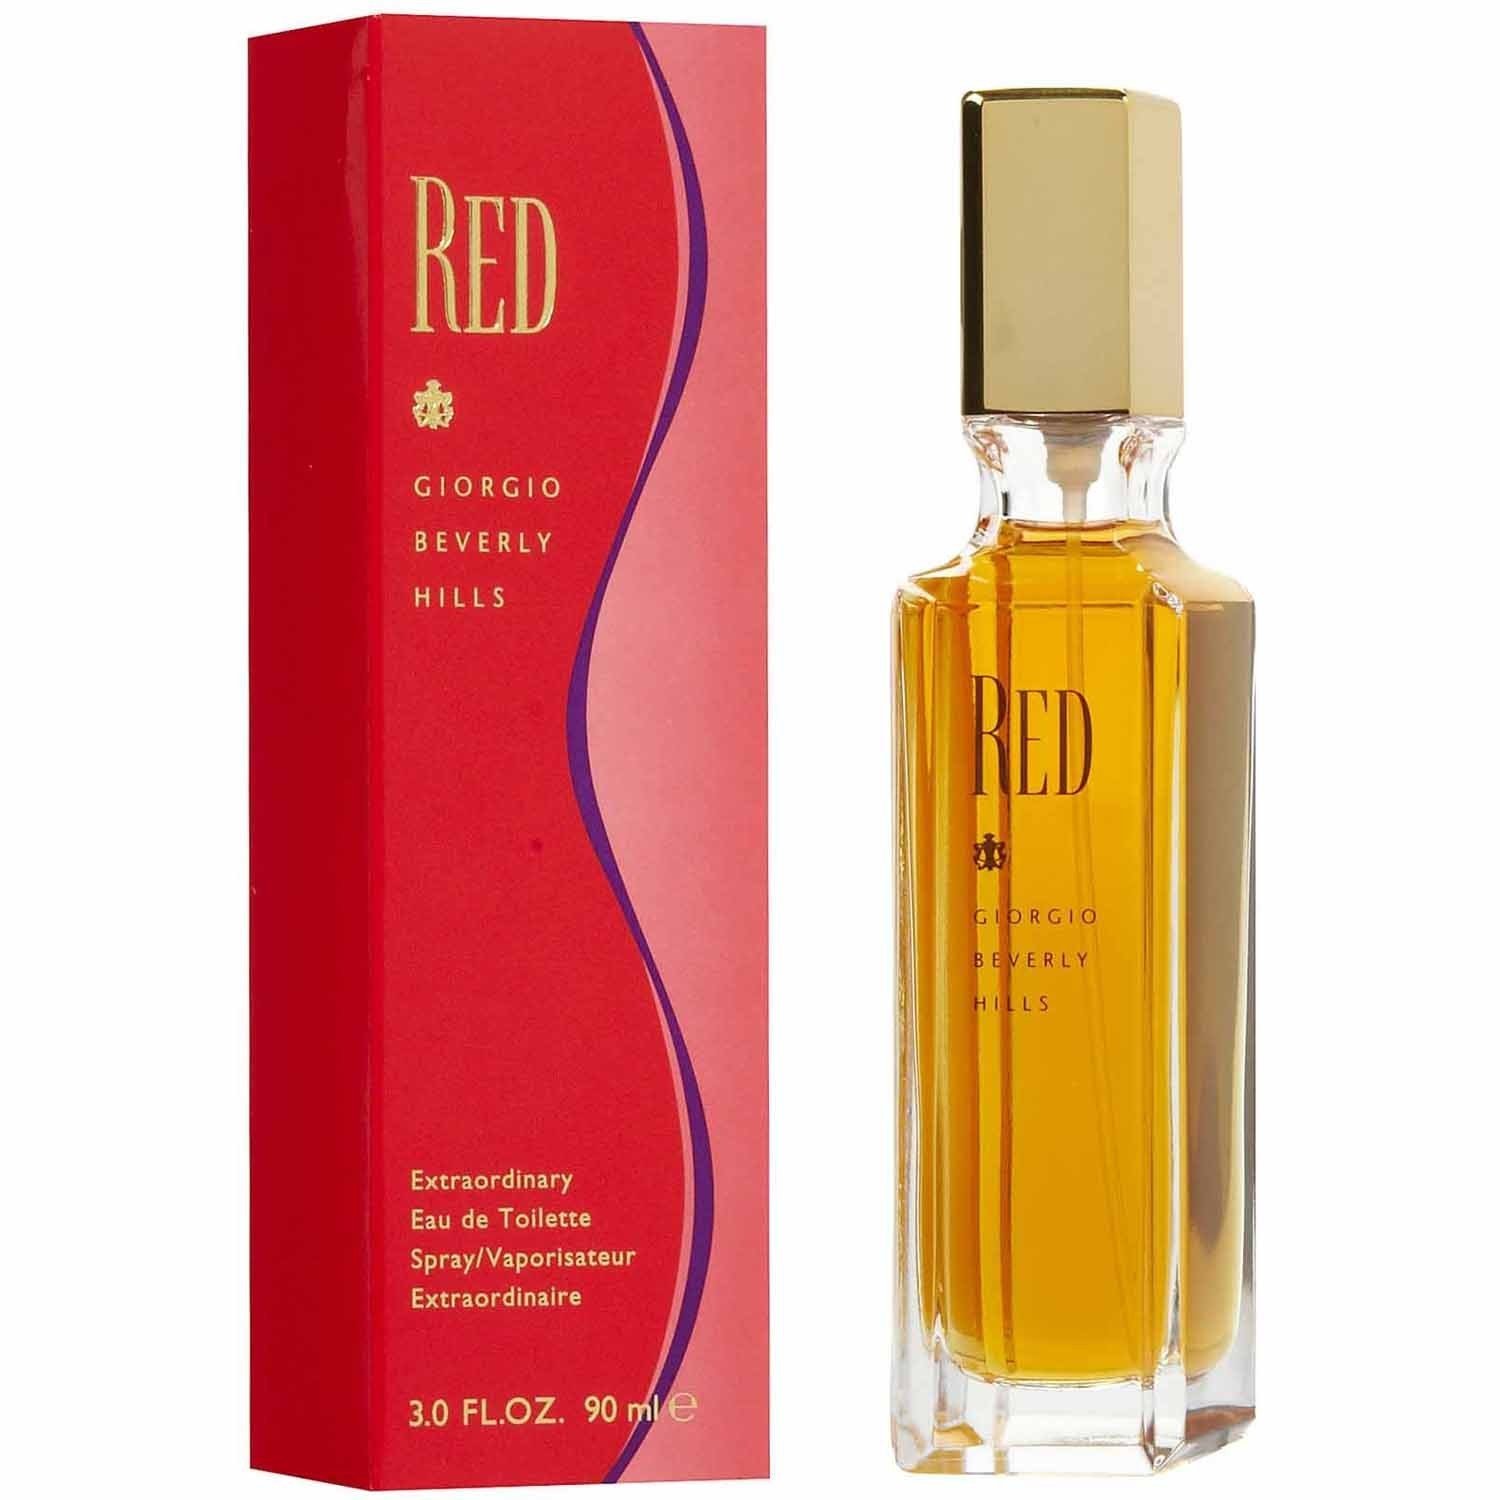 3.0 oz EDT Red Perfume by Giorgio Beverly Hills for Women